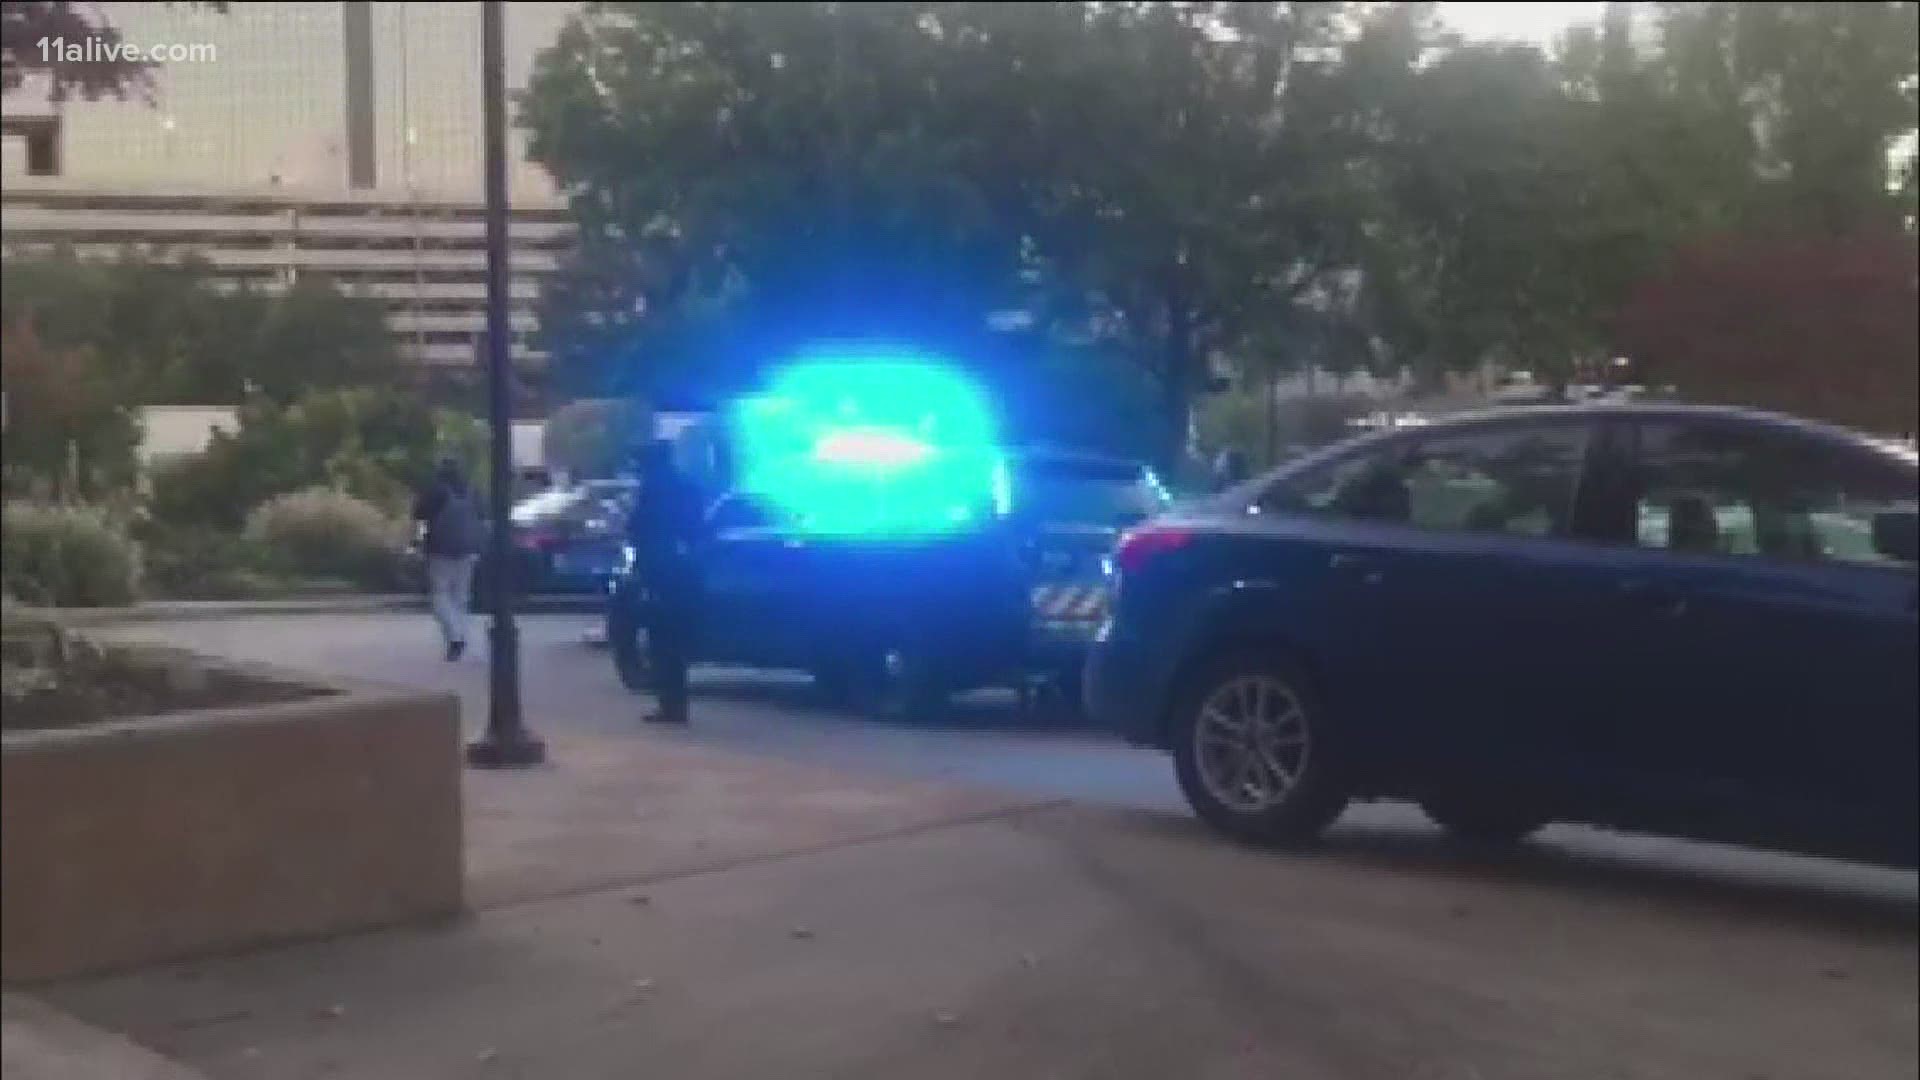 Police say the gunfire occurred inside the Neiman Marcus store after four men allegedly tried to rob another at a cash register.